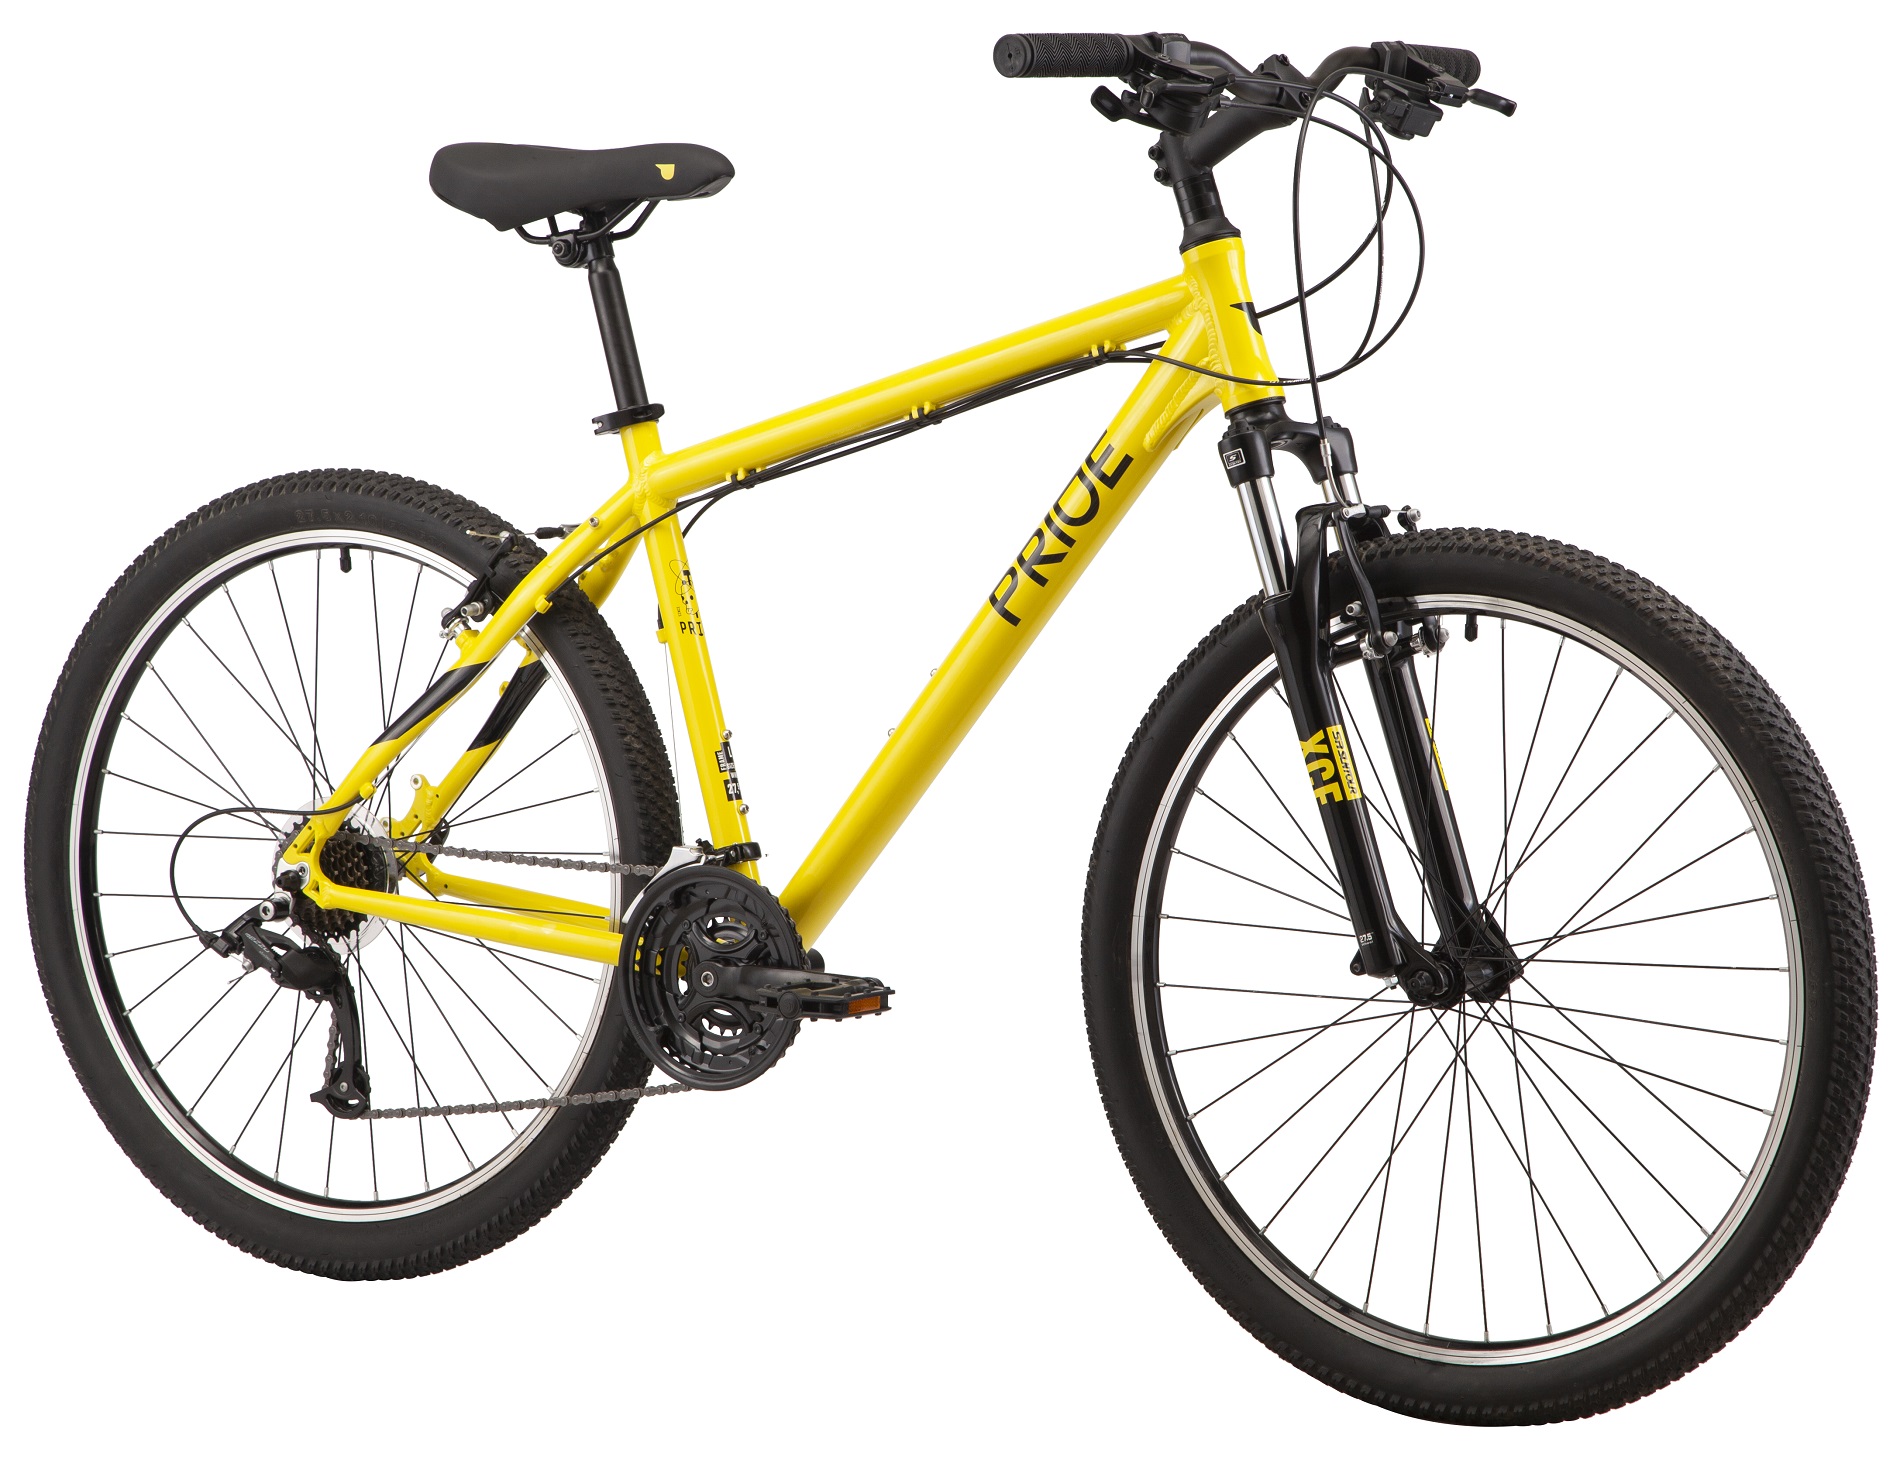 27.5" PRIDE MARVEL 7.1 frame - M 2022 Yellow (rear and front switches and tamnet - Microshift) Photo 2